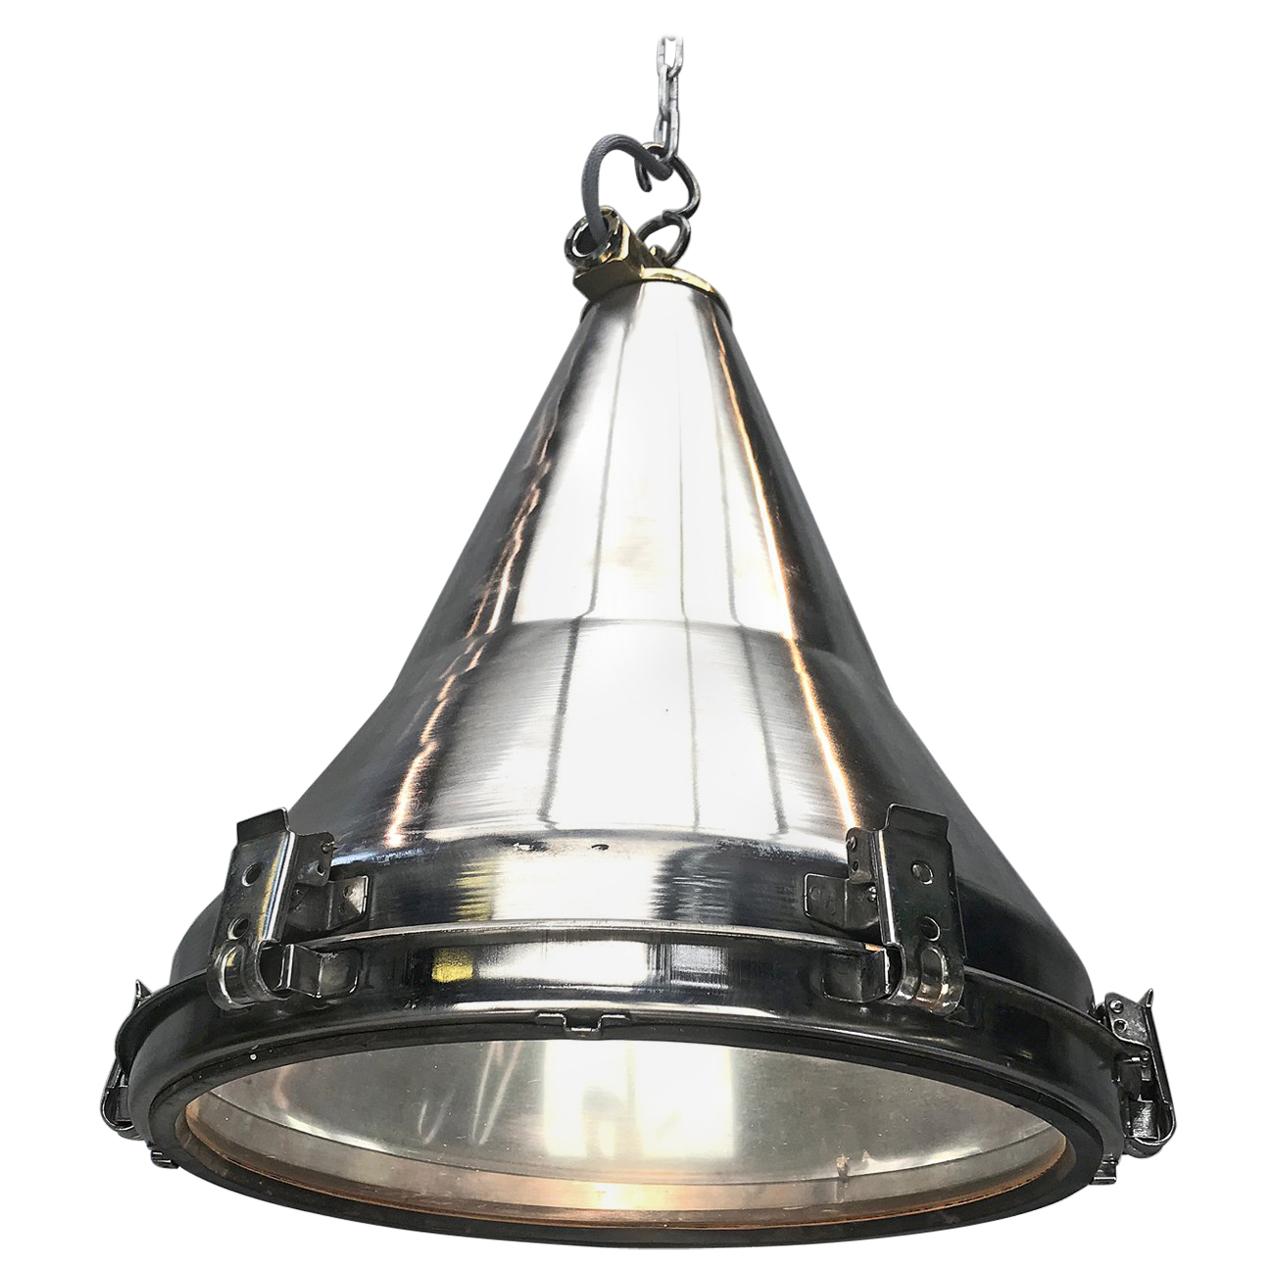 Late Century Korean Stainless Steel, Brass and Glass Conical Flood Light Pendant